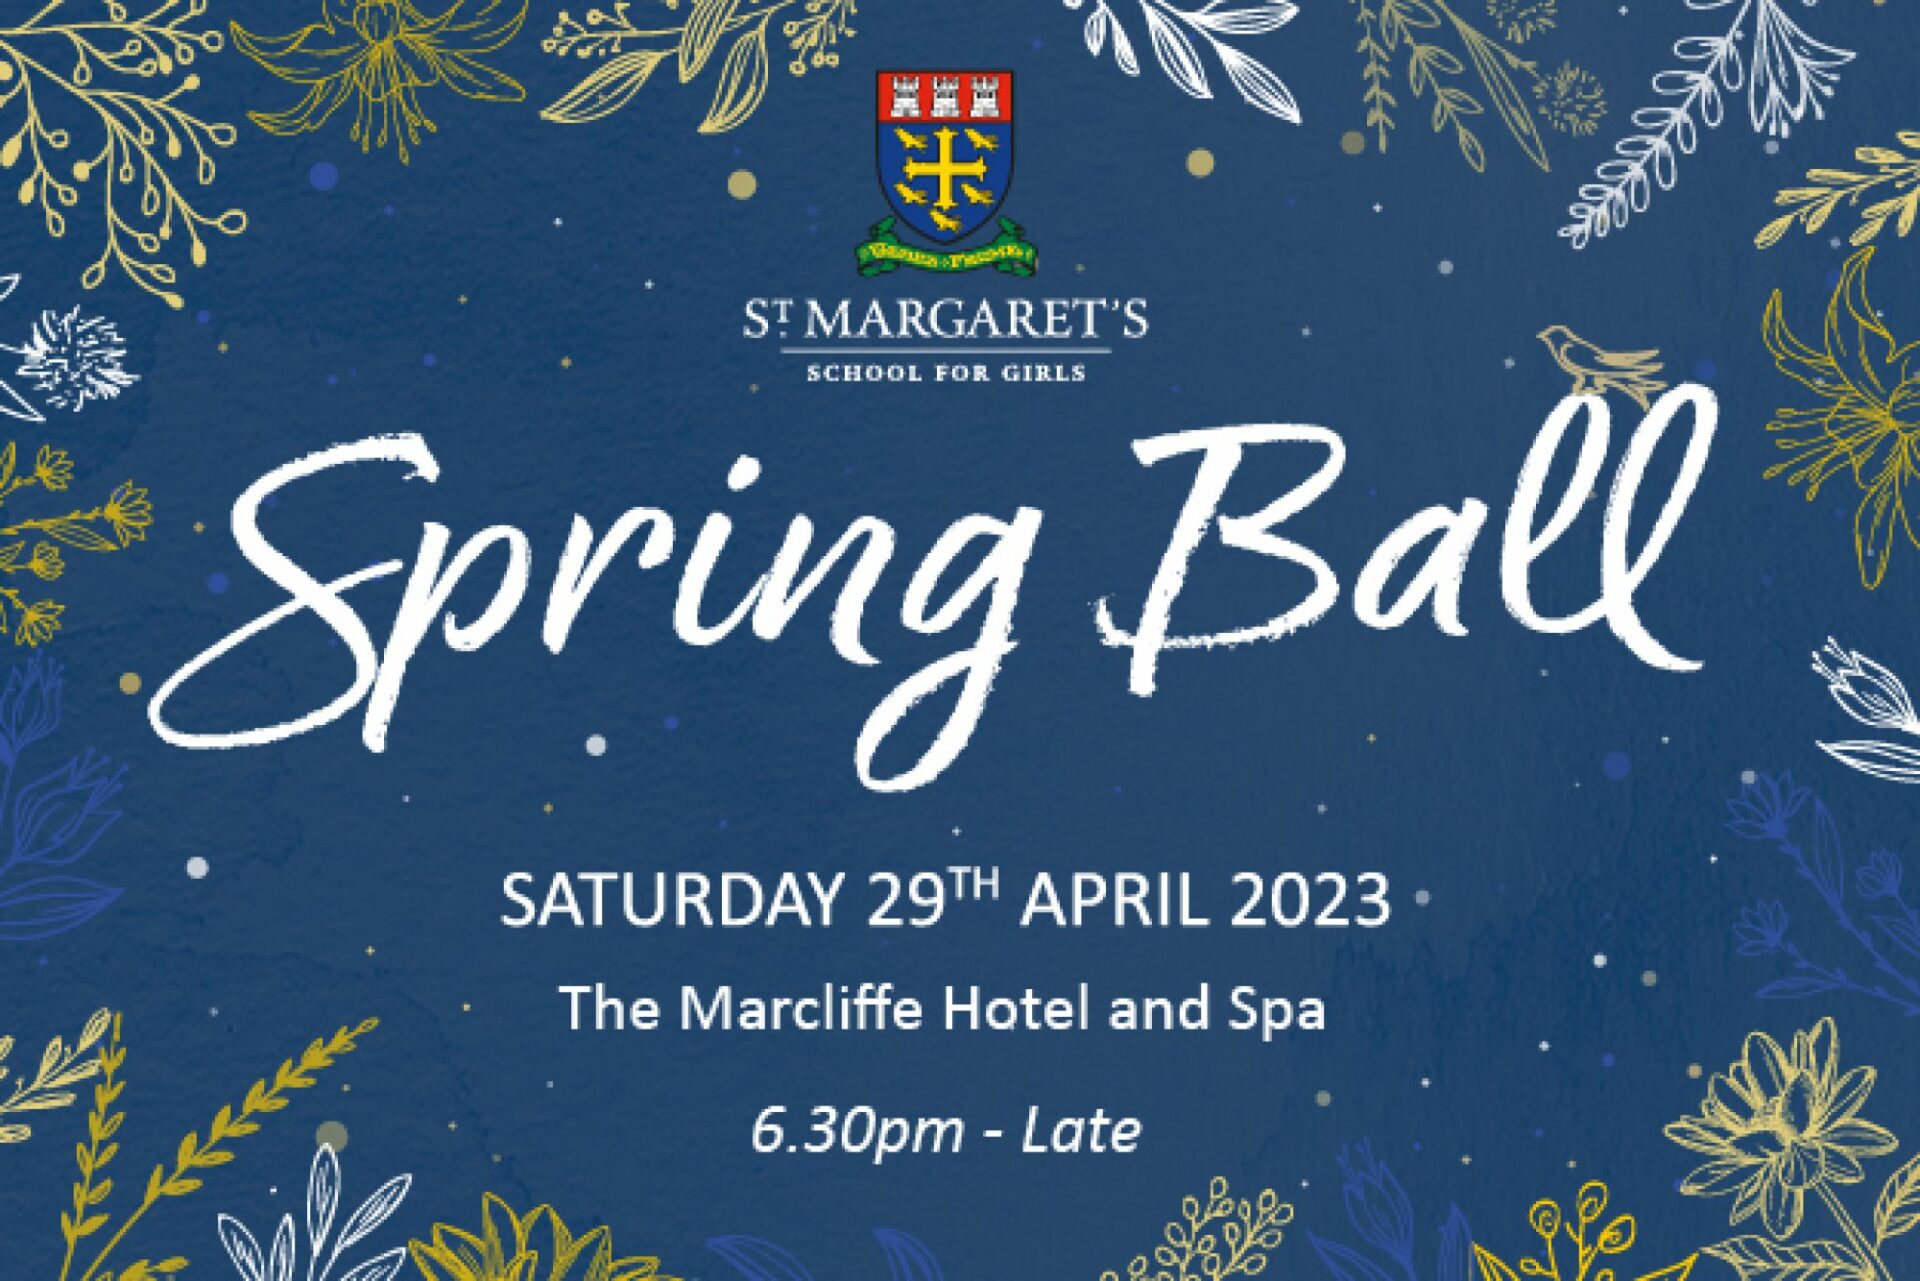 St Margaret’s School for Girls Spring Ball and Online Auction